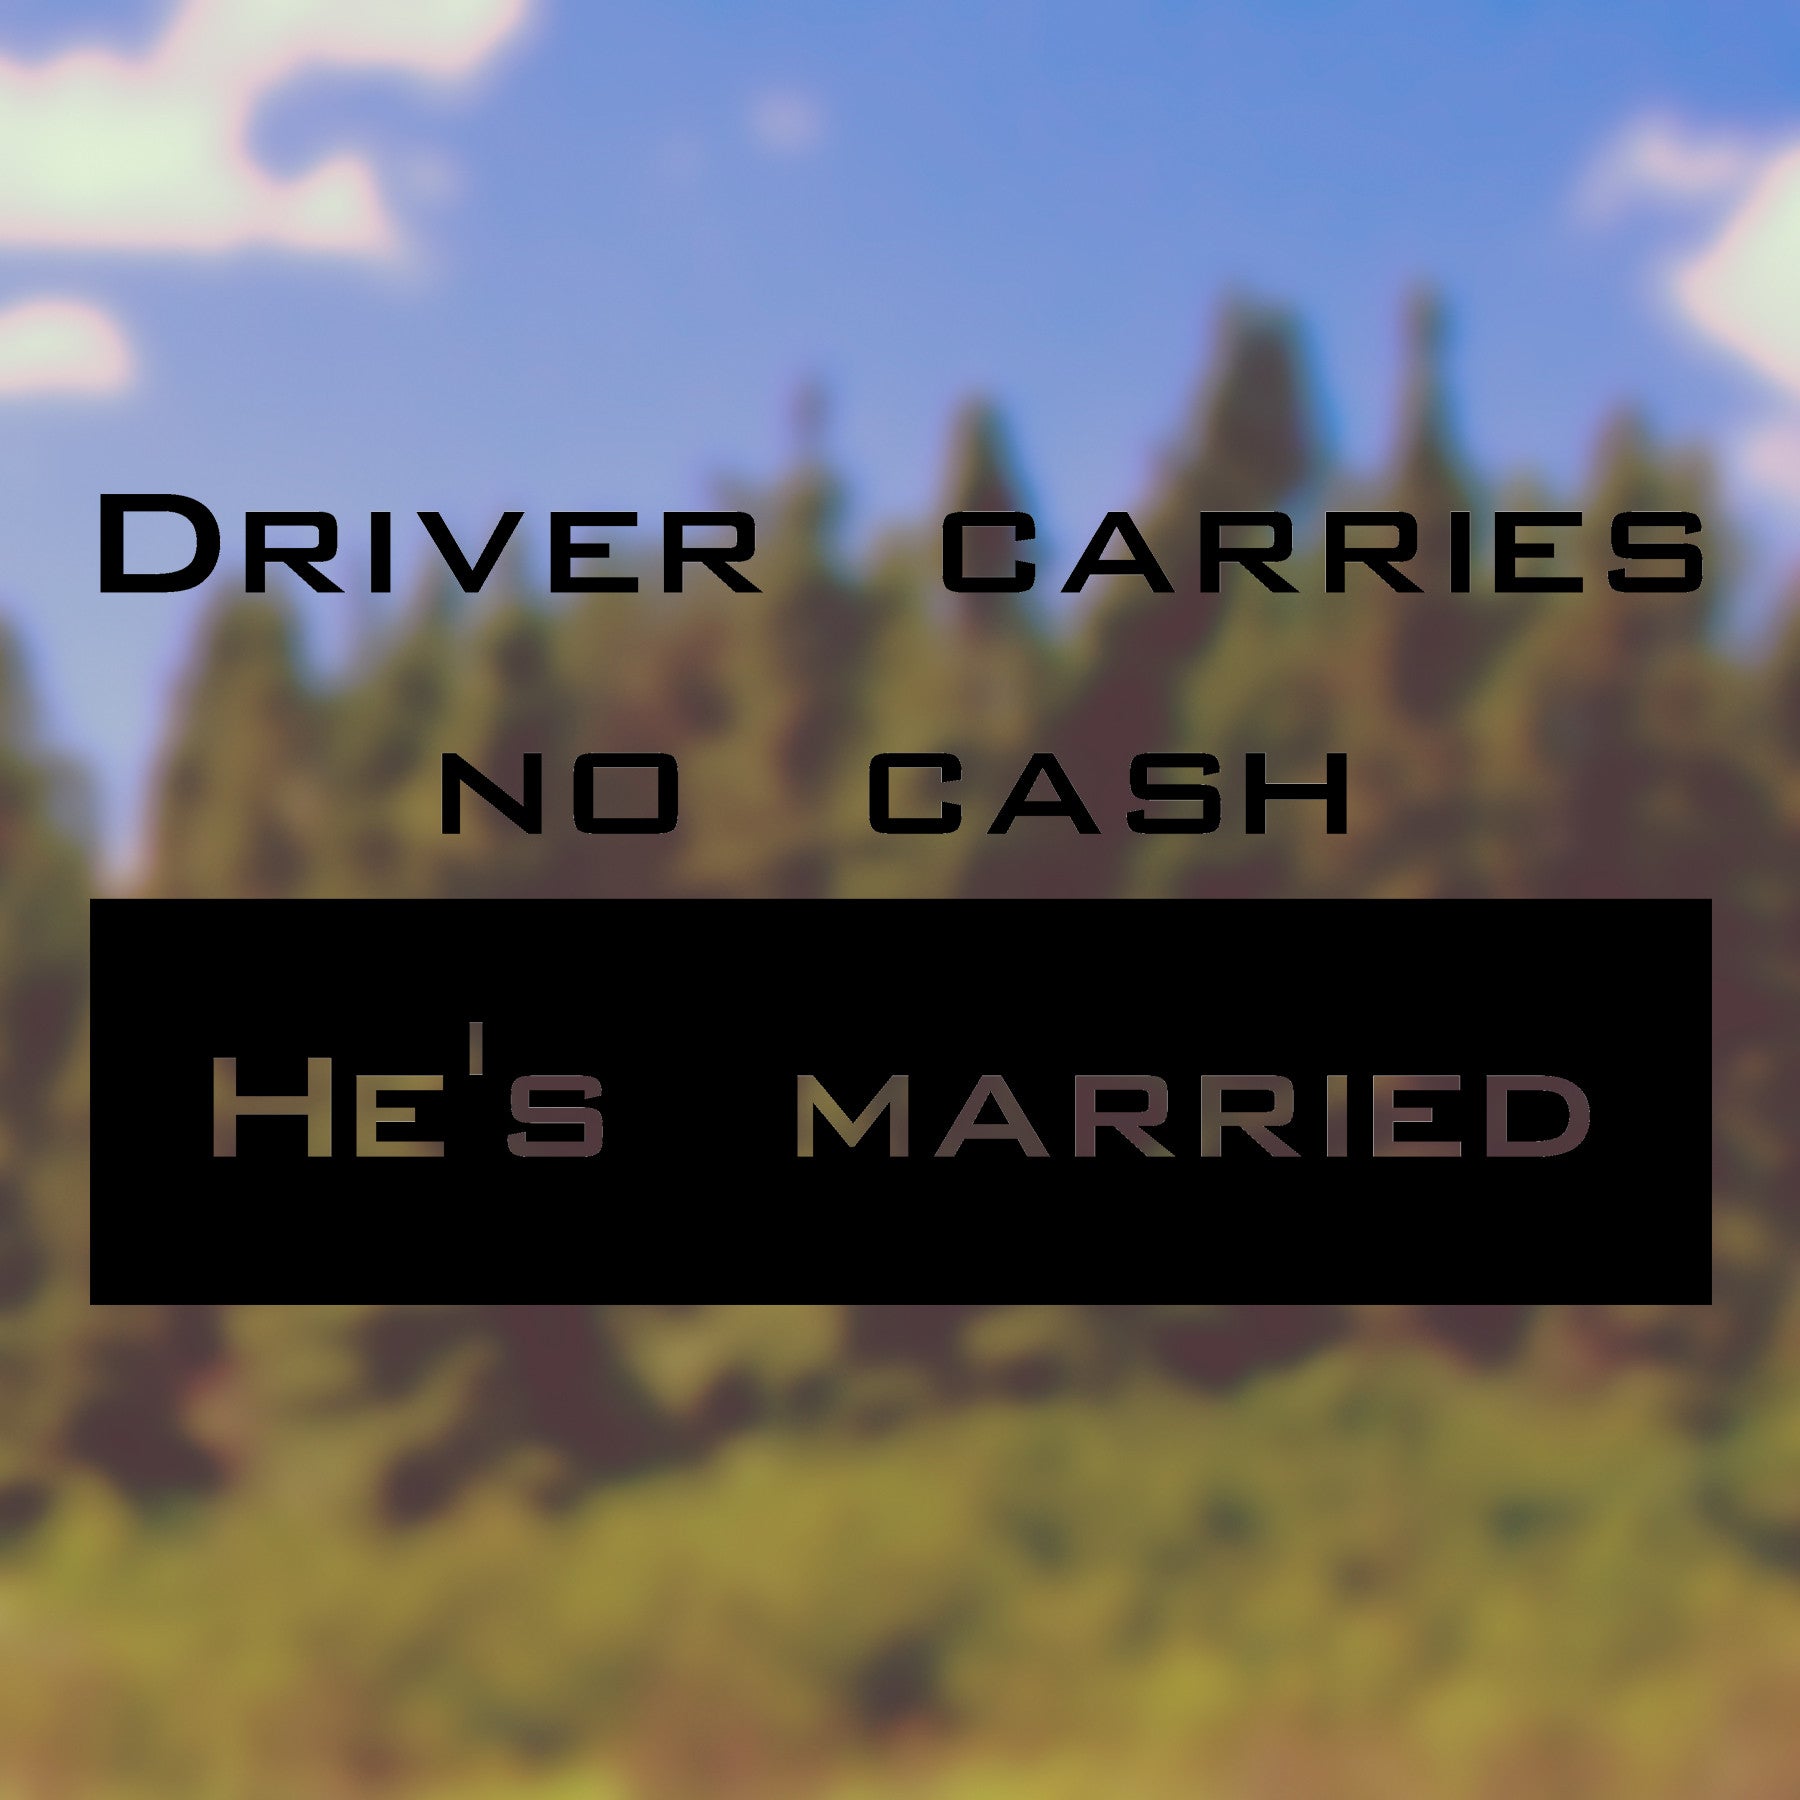 Driver carries no cash, he's married! | Bumper sticker - Adnil Creations